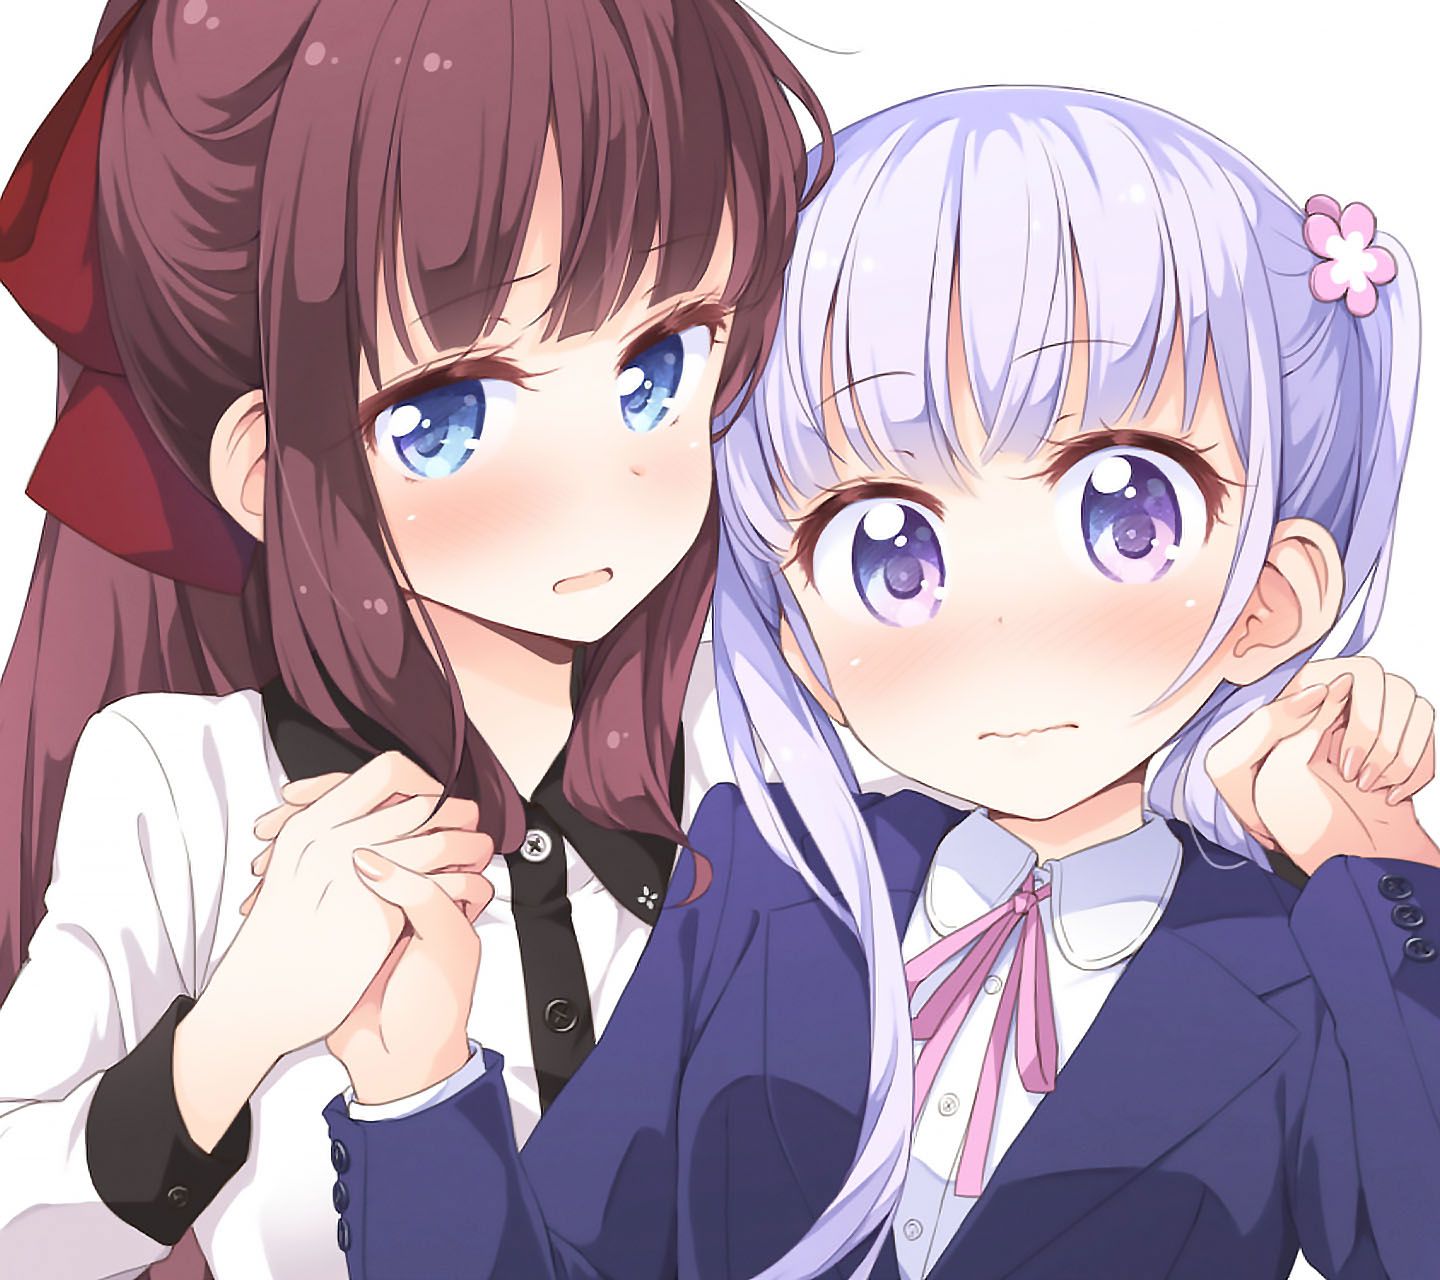 New Game ニューゲーム Android壁紙 4 アニメ壁紙ネット Pc Android Iphone壁紙 画像